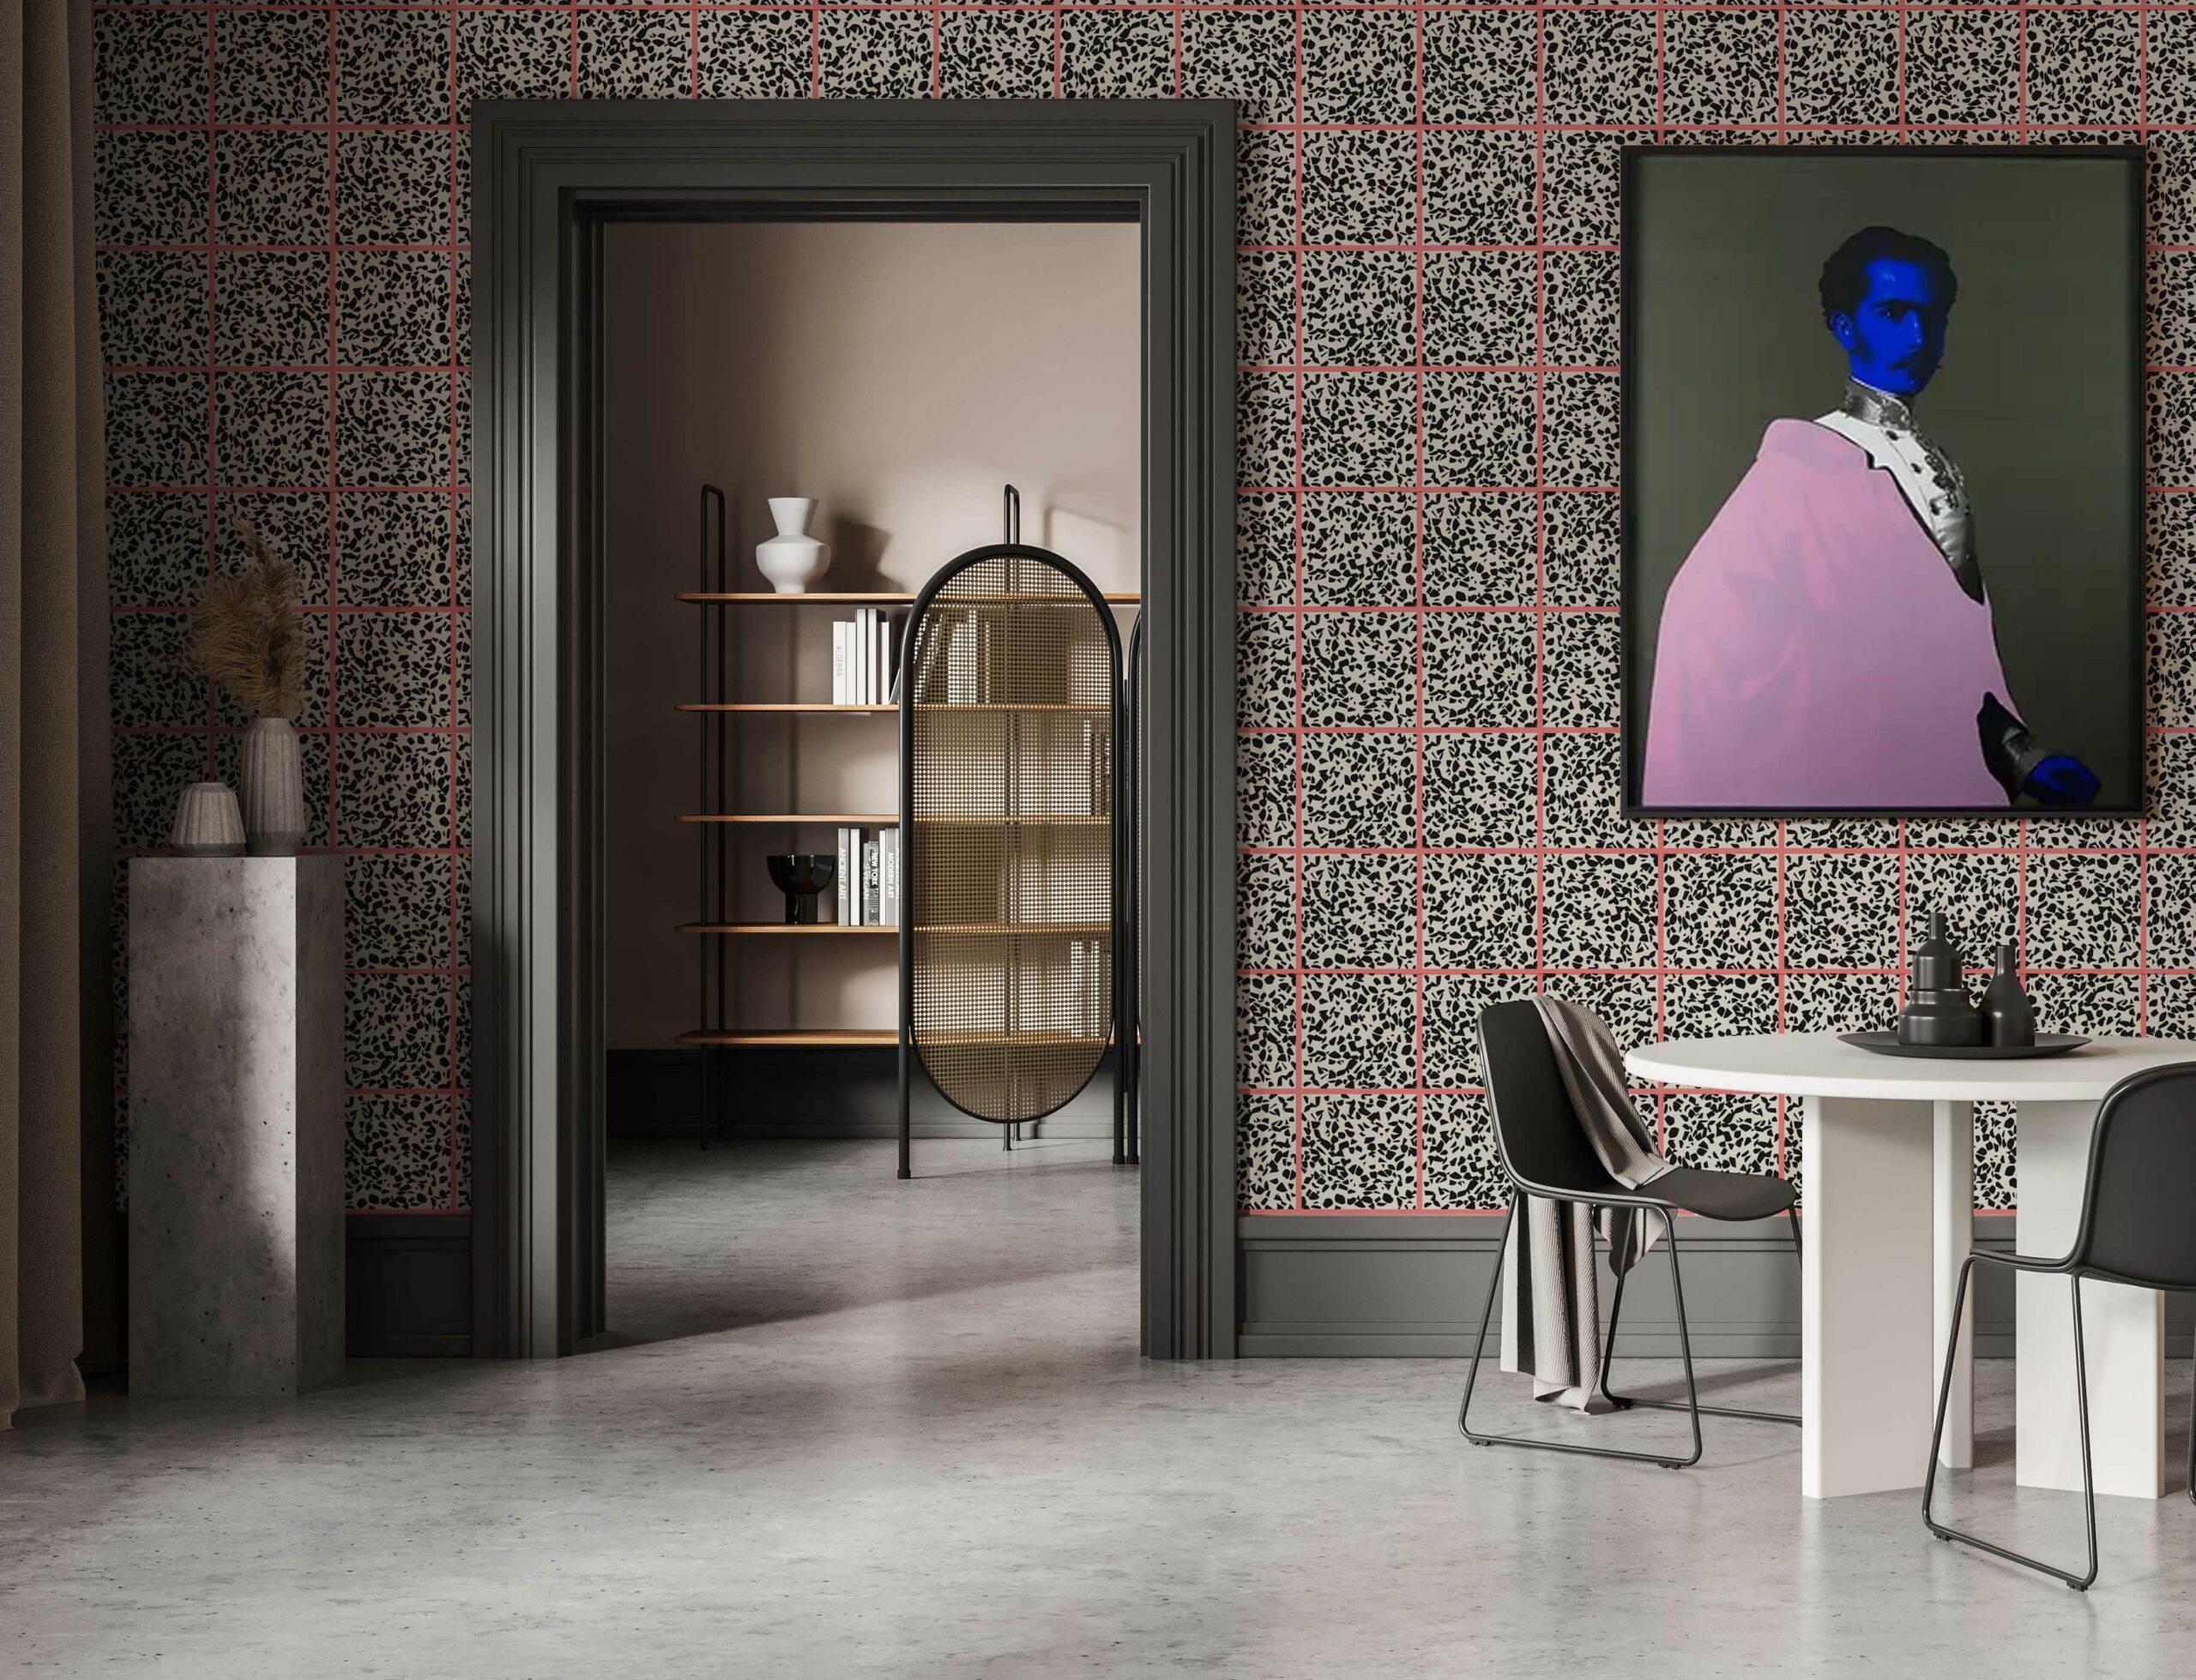 MaVoix-wallpaper Strawberry Escape -by-Studio-Lievito-pattern-living room full ambient